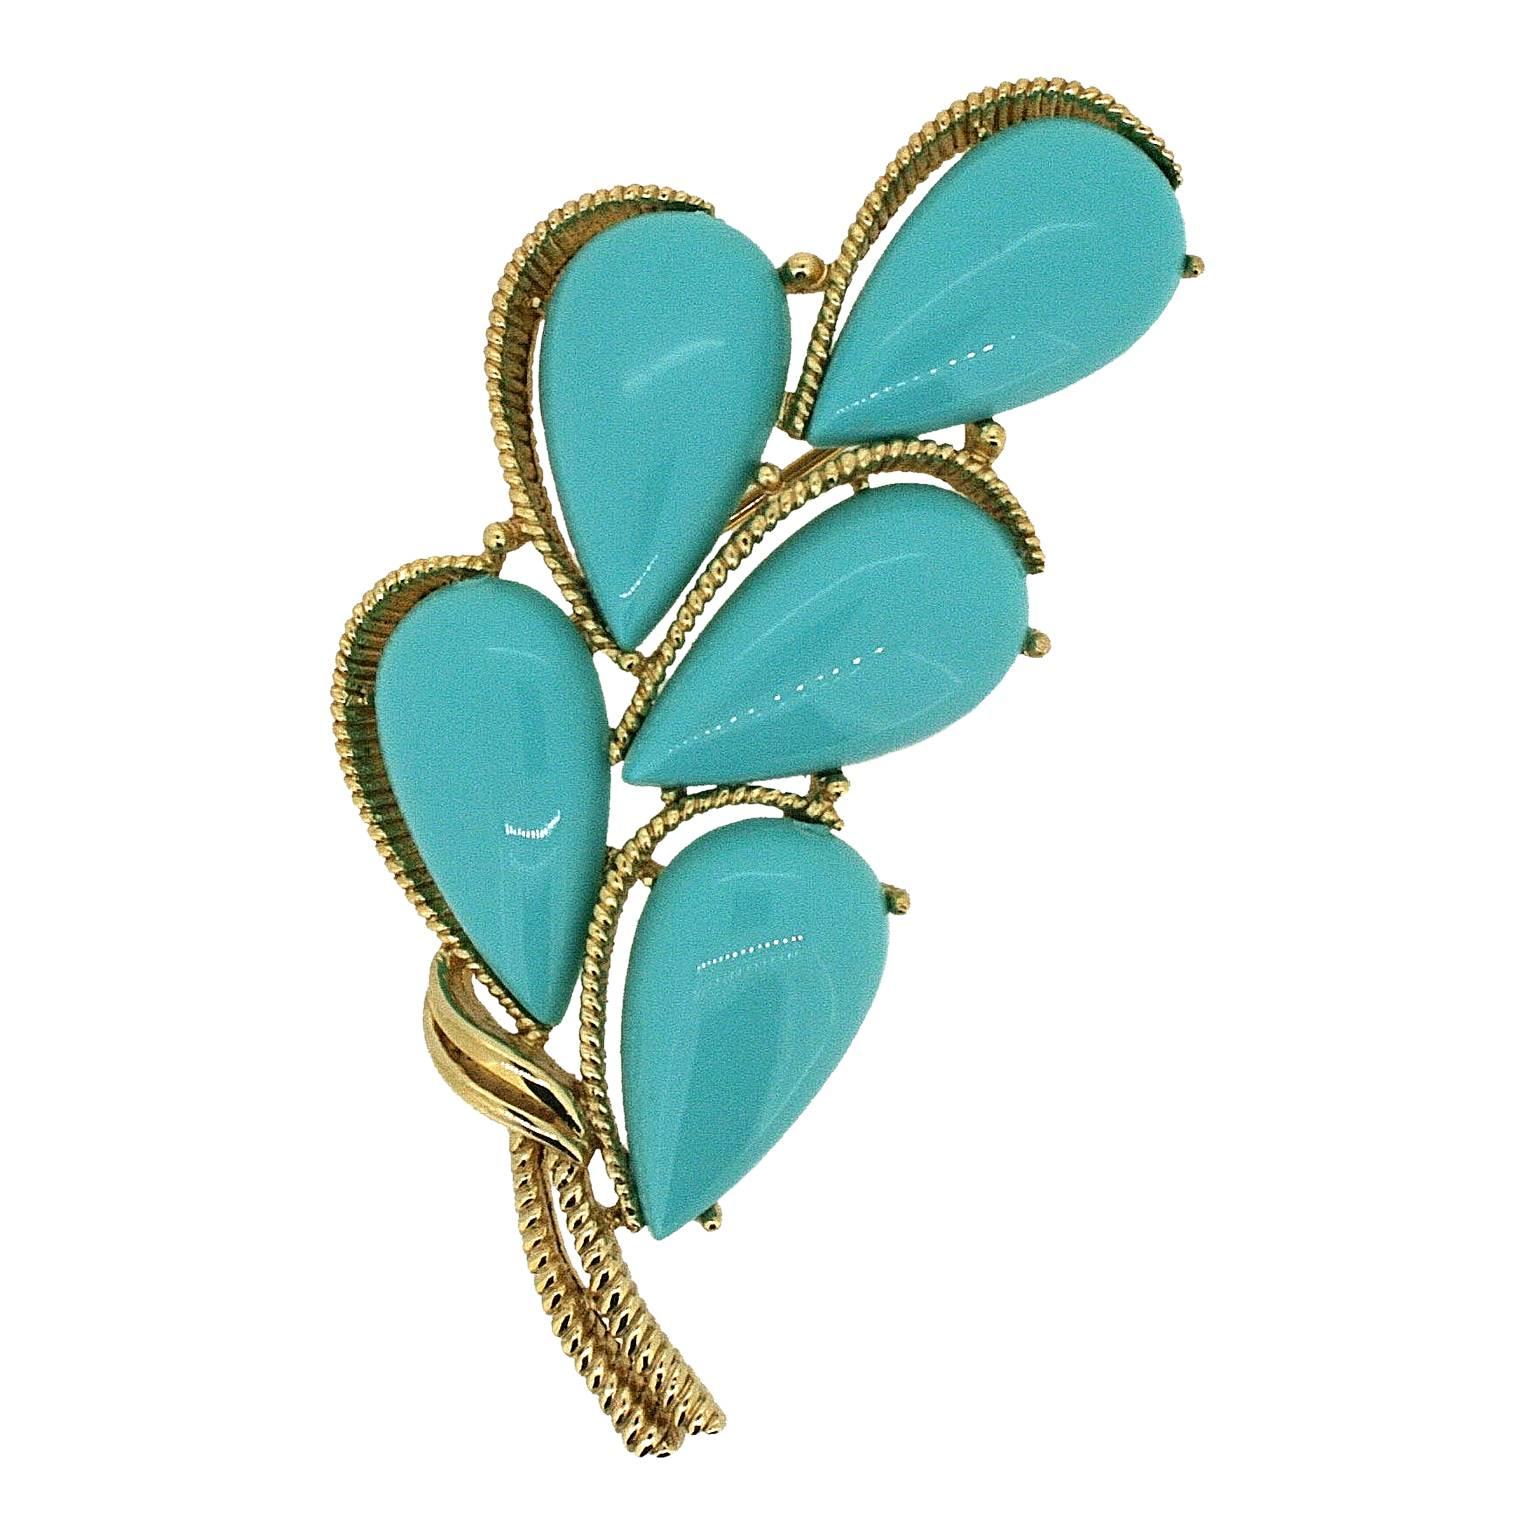 Women's Trifari 1960s Turquoise Cabochon Brooch and Earrings Set For Sale